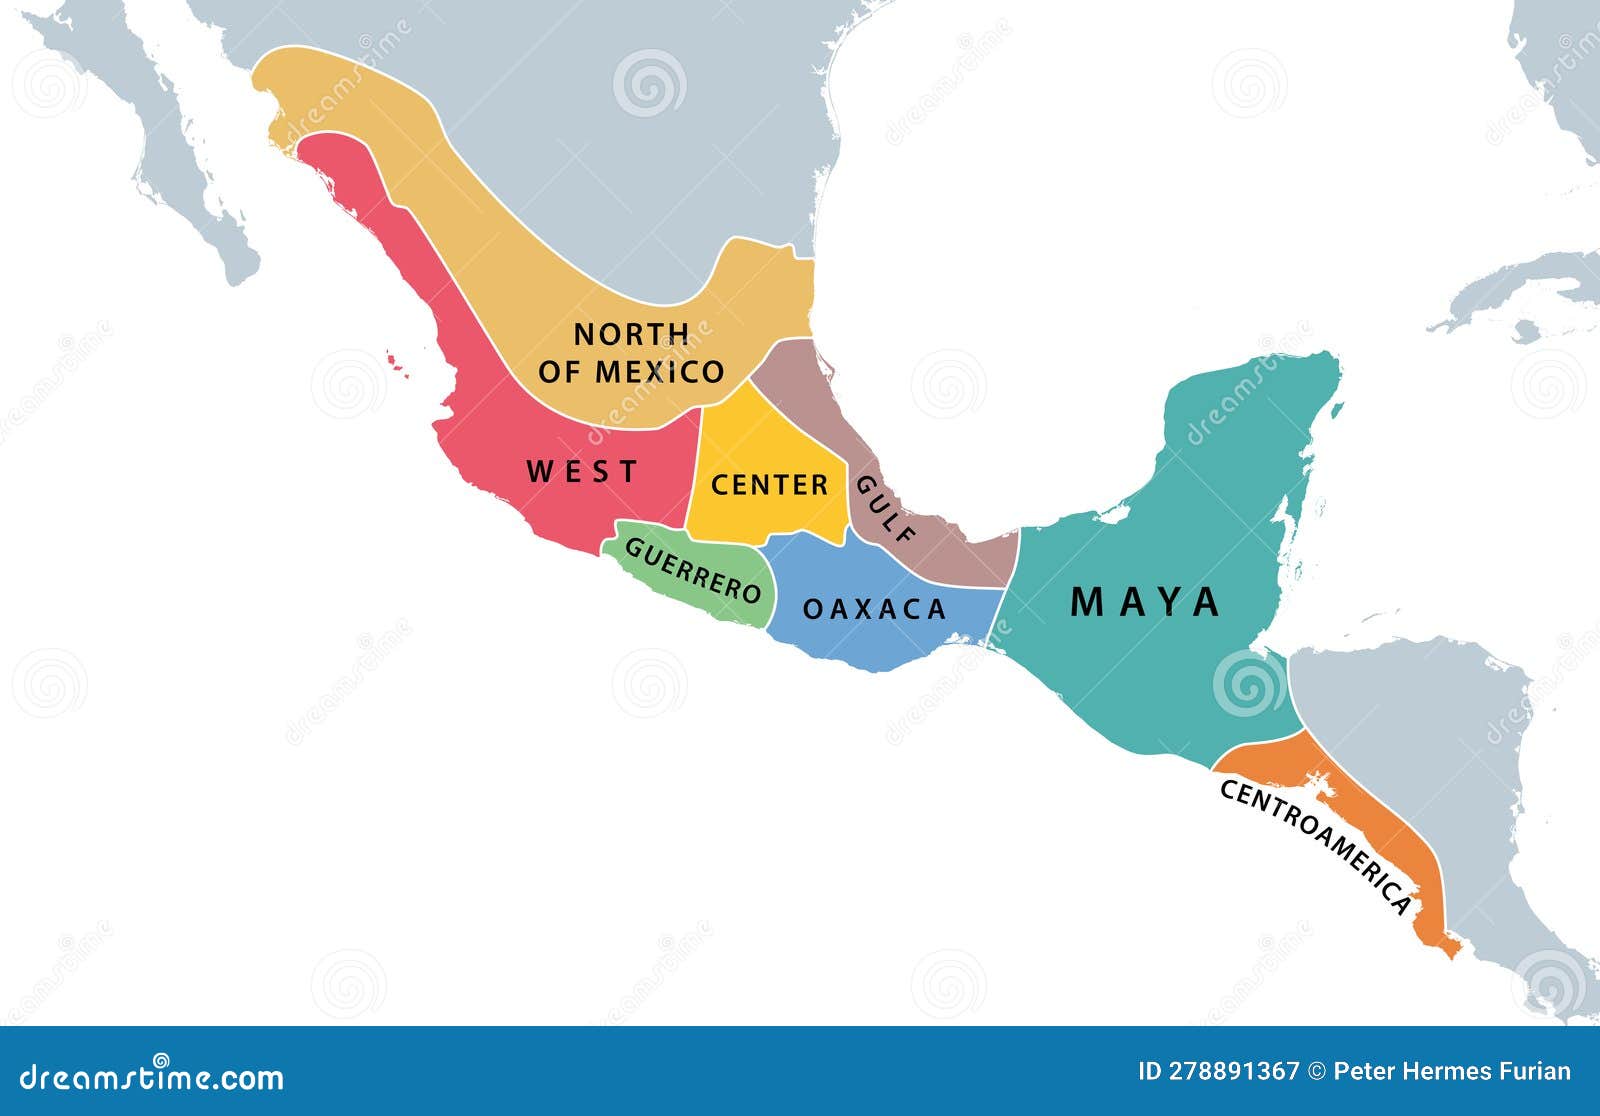 mesoamerica and its cultural areas, map of a historical region